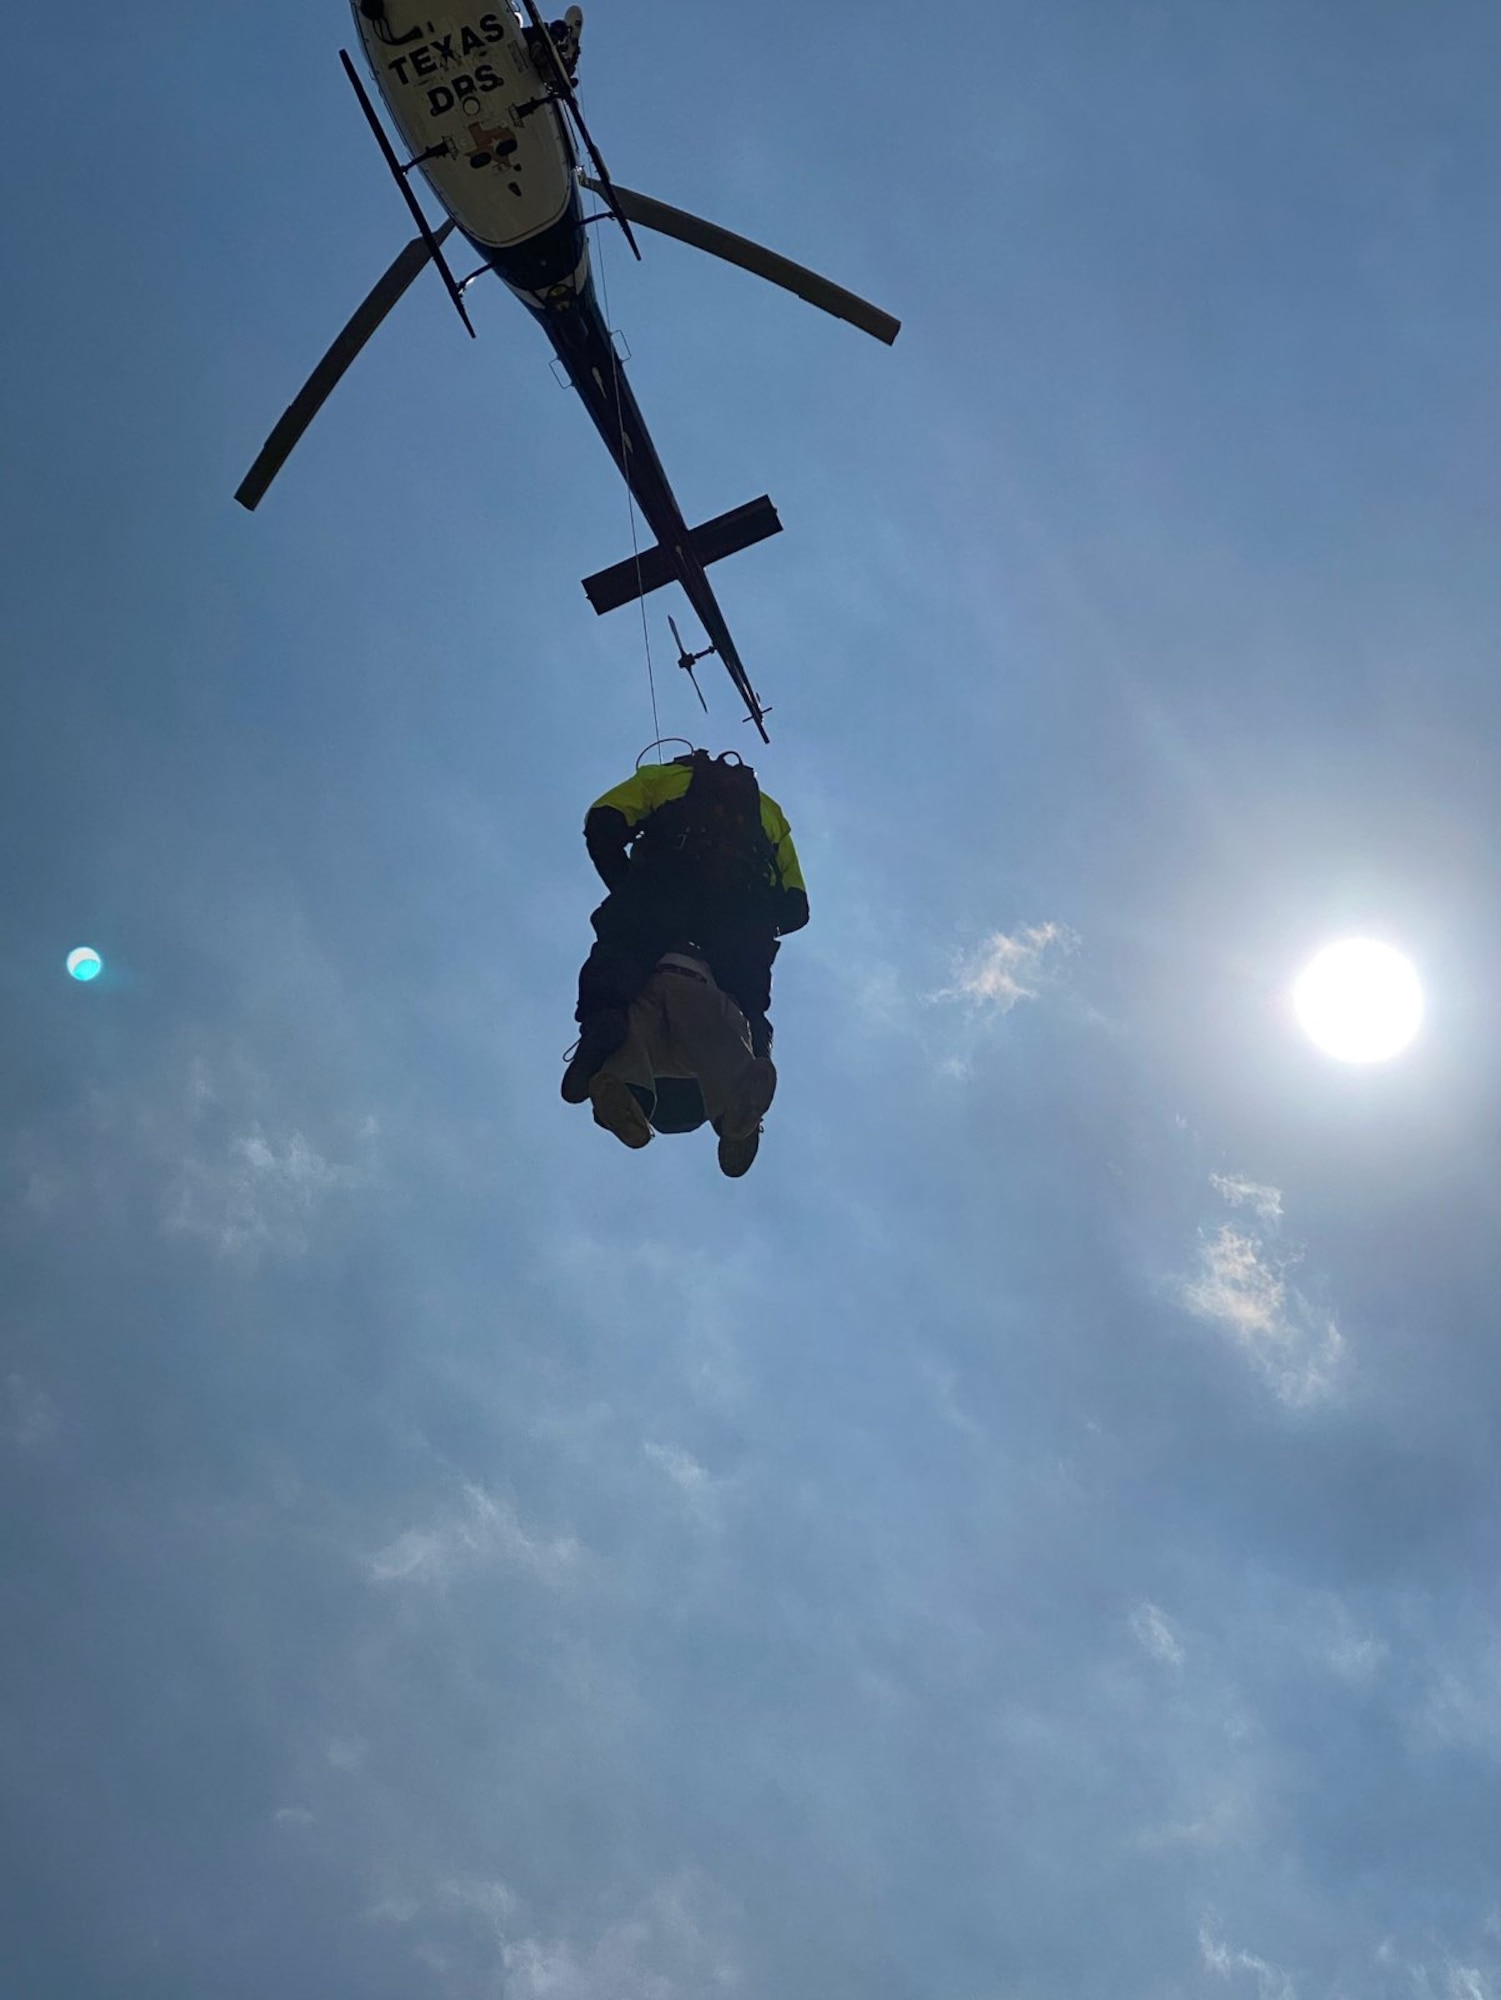 Helicopter hoisting person into the air